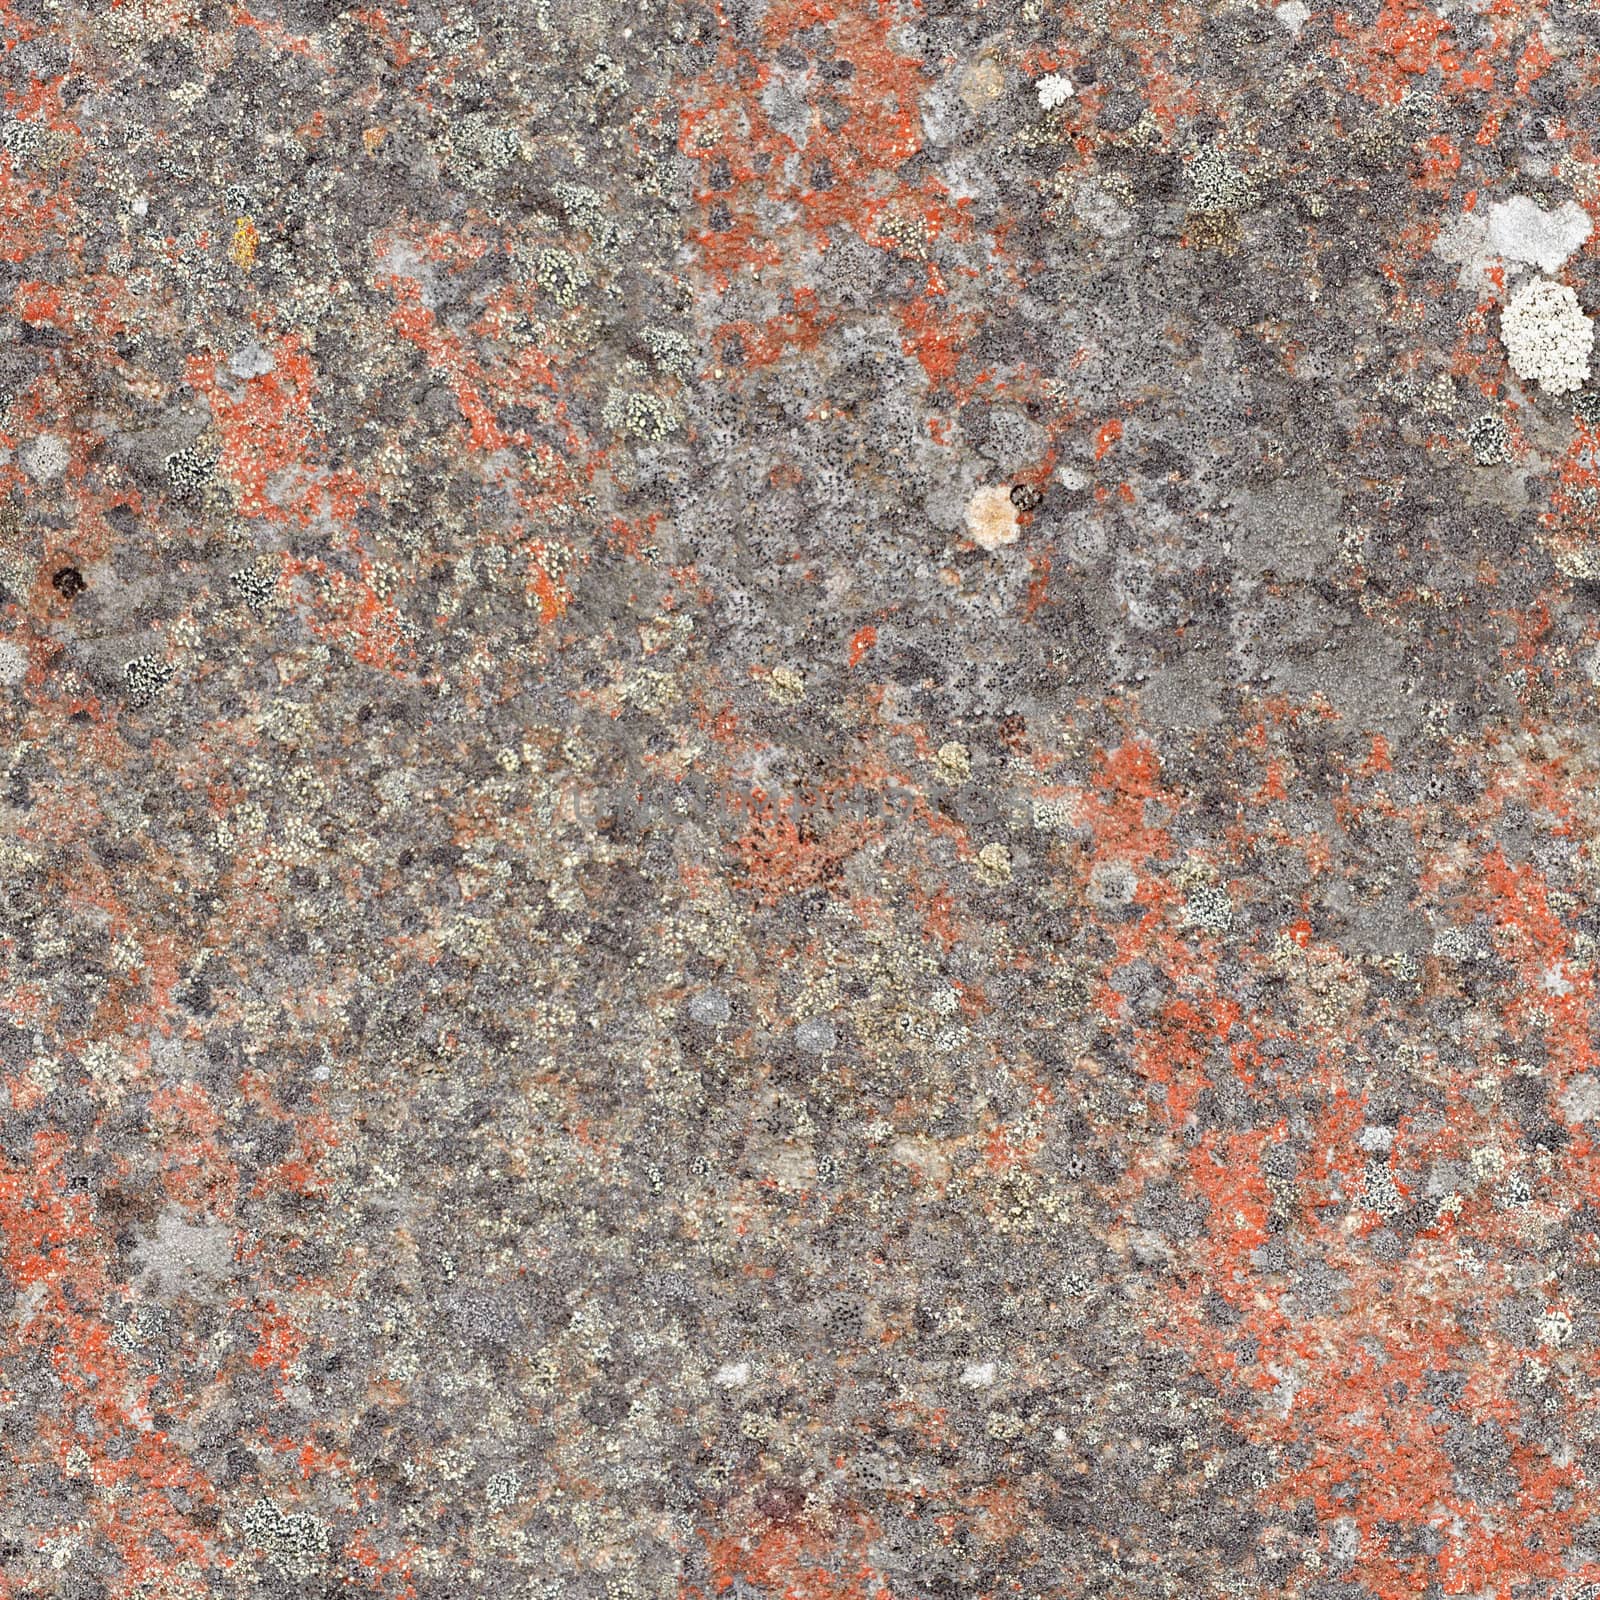 Seamless texture - rock with lichen by pzaxe